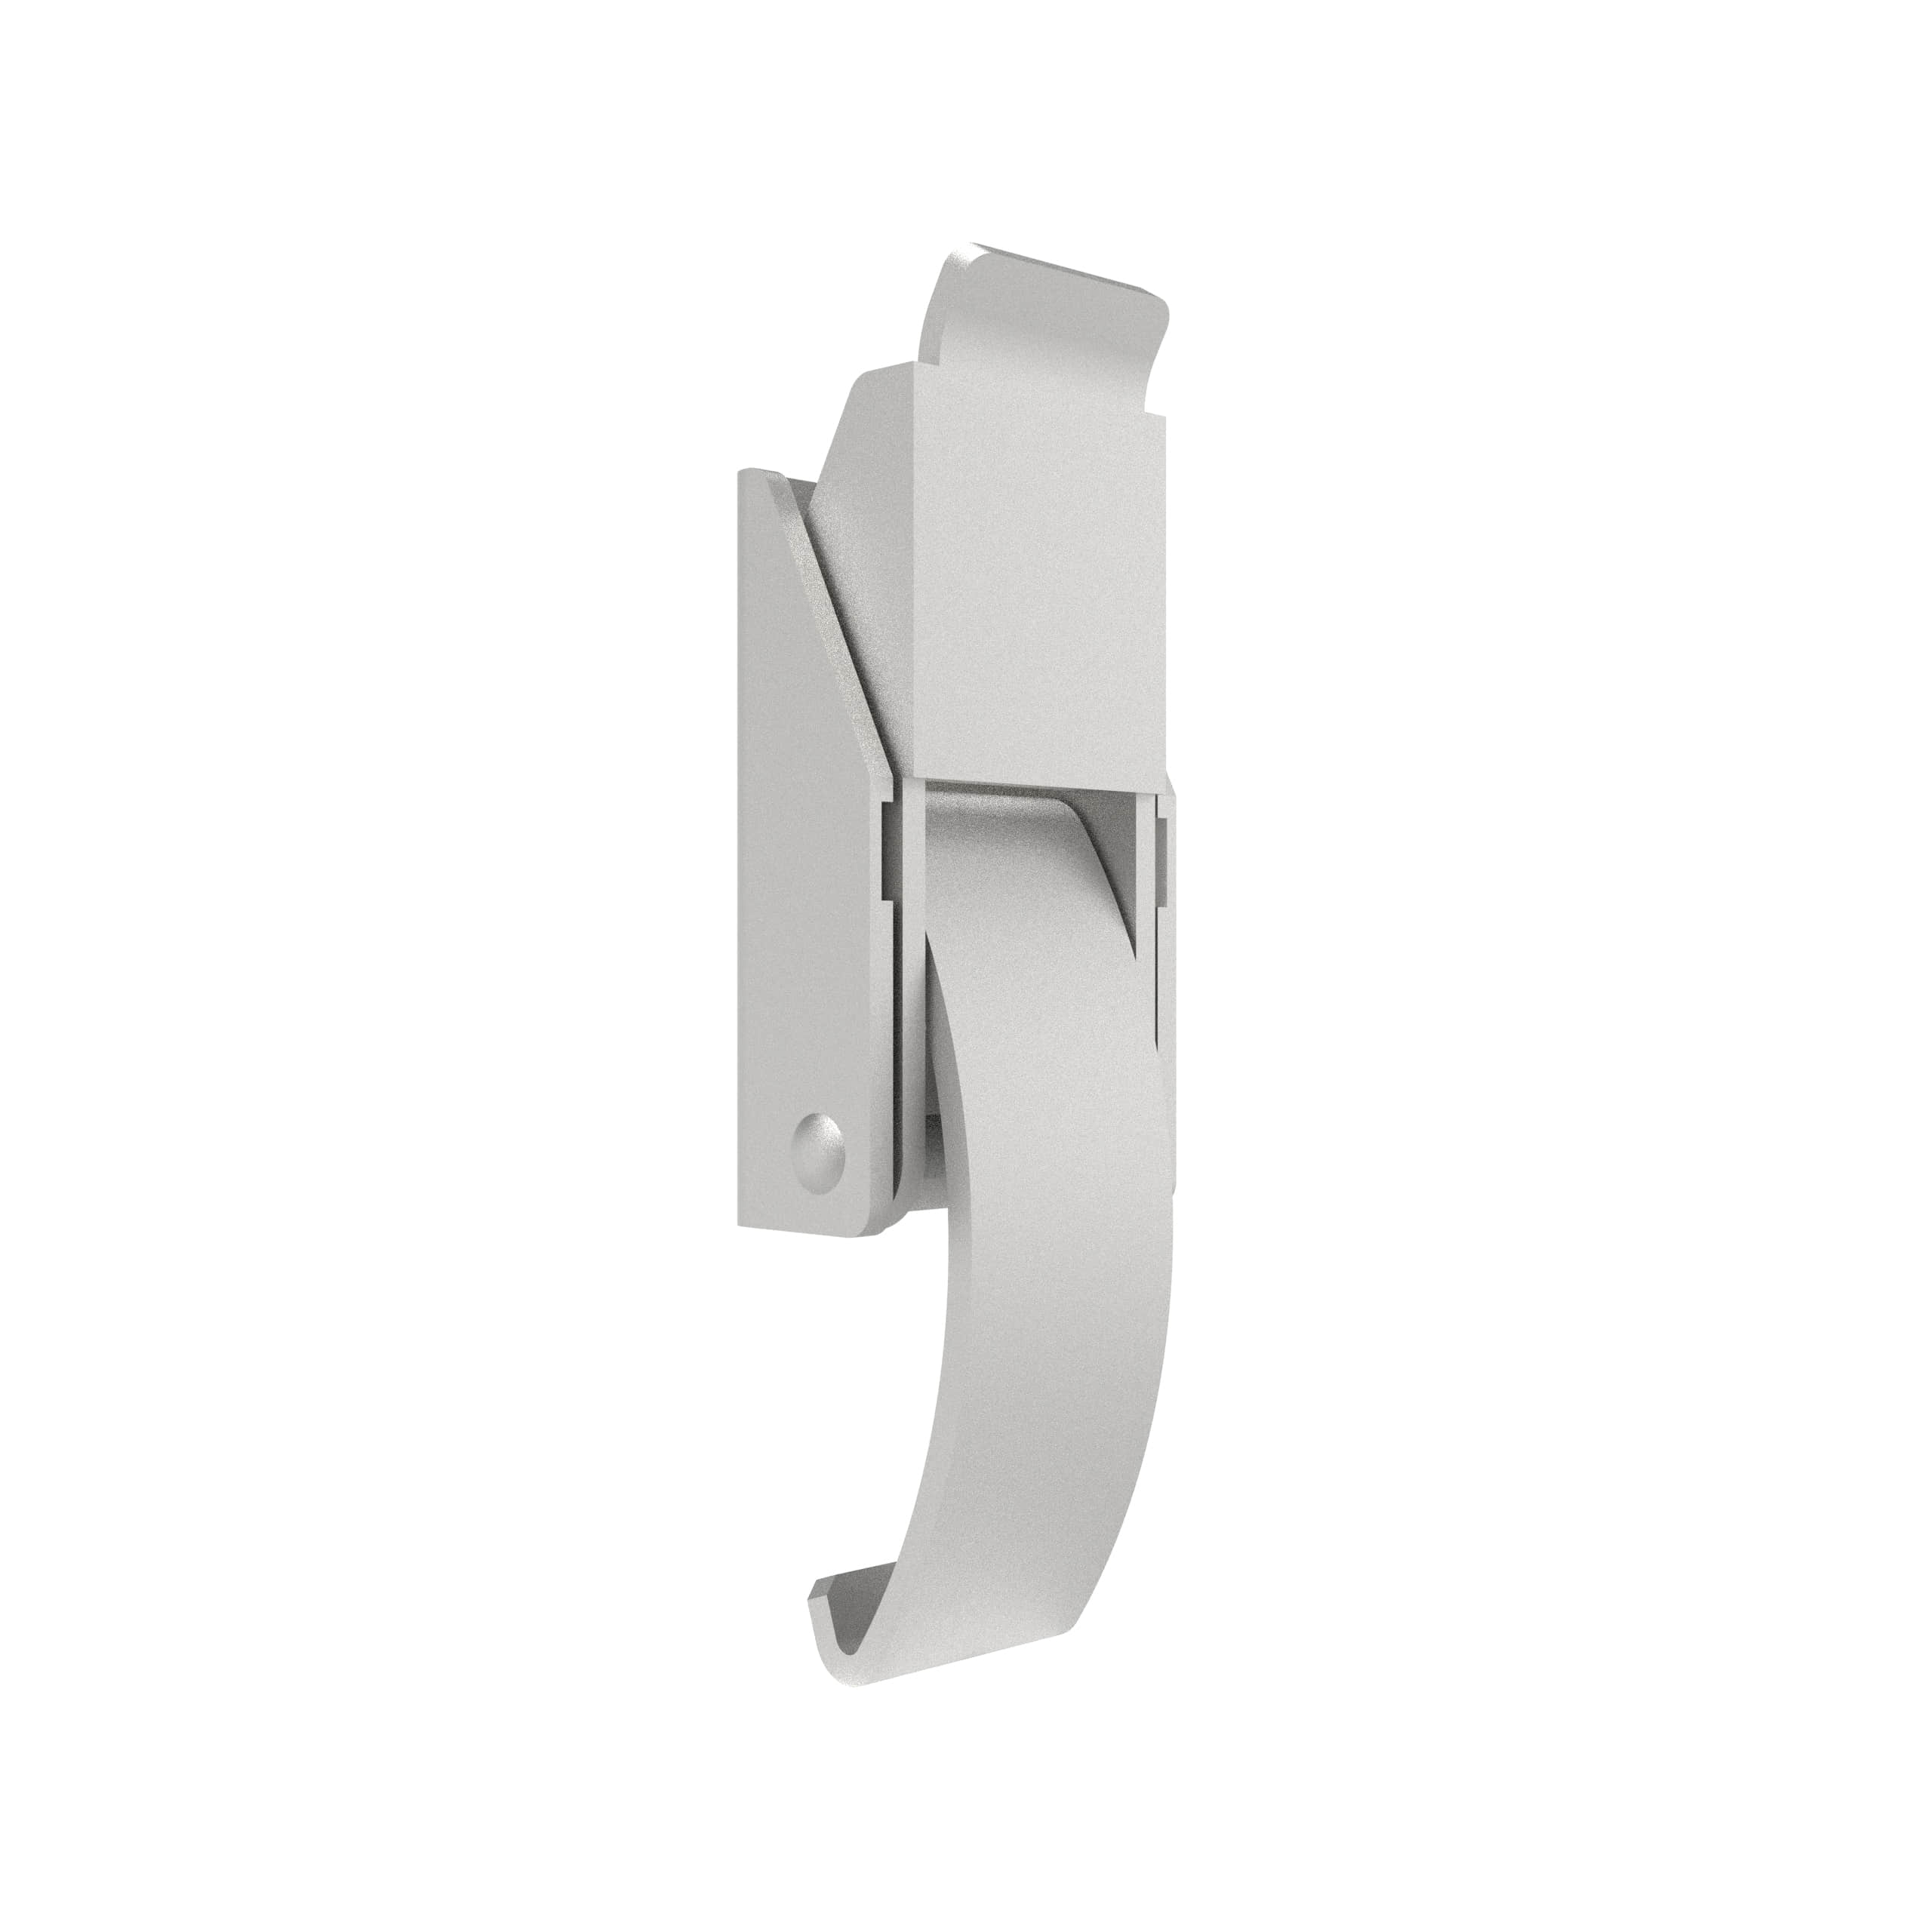 F-1641-15-A1 | Over-center Draw Latch Small Size, Handle Tab Up,Short connection,non-padlockable , Stainless Steel, Passivated,bright